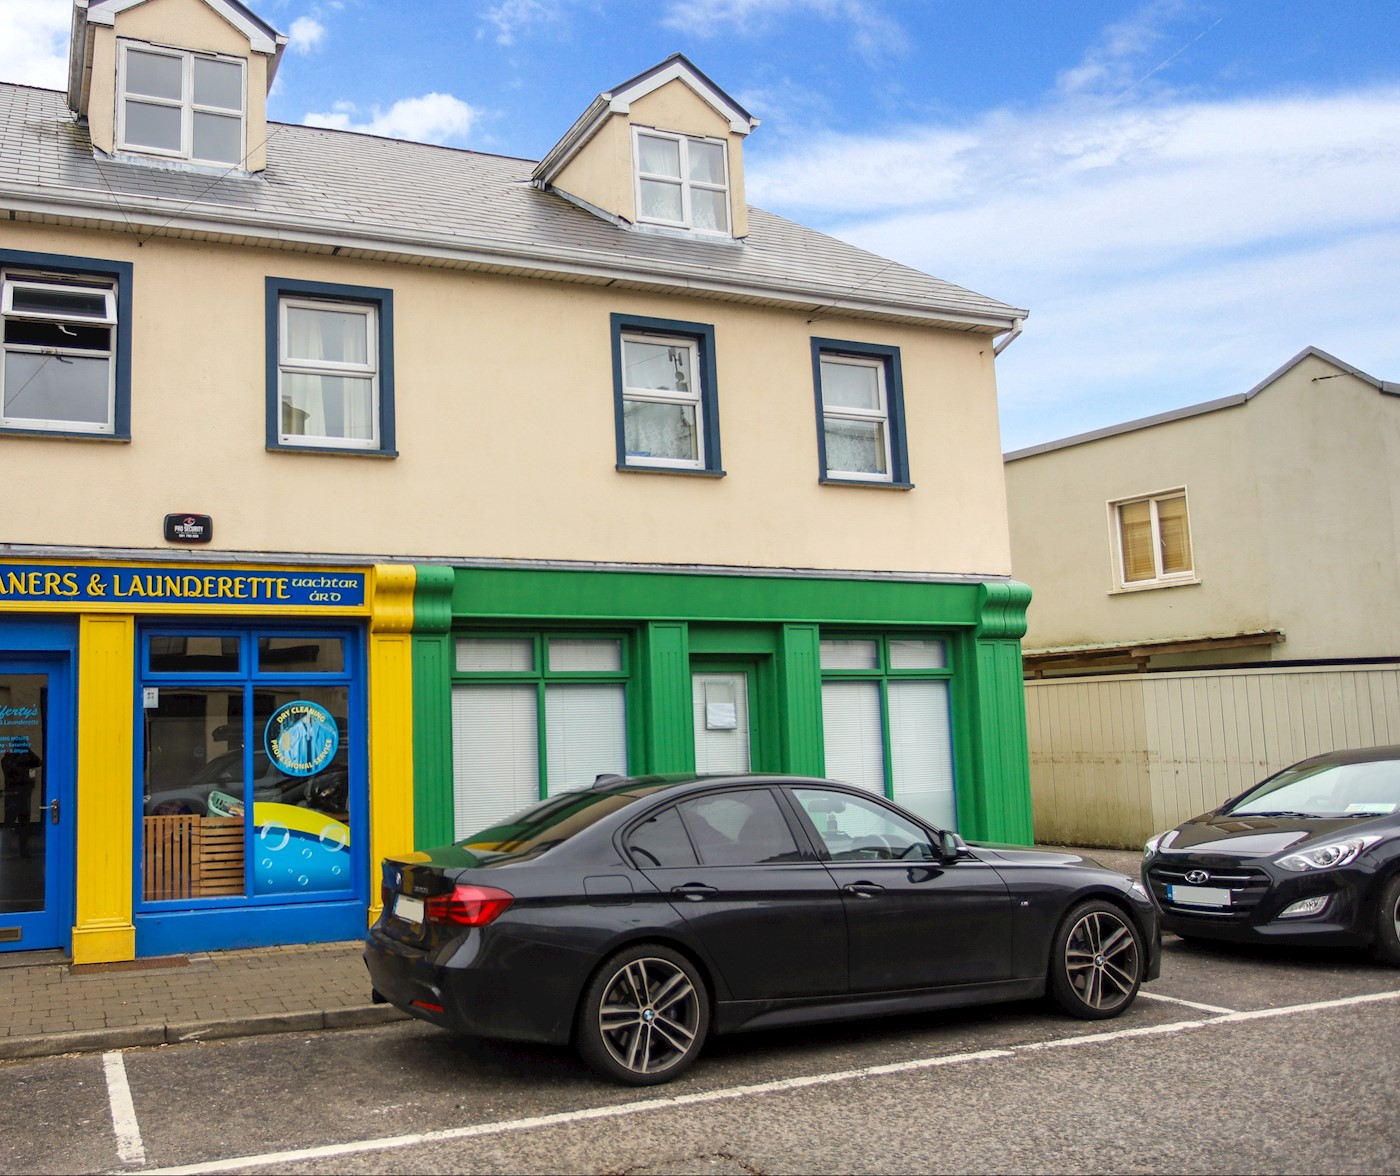 Apartment 7, Weighbridge House, Camp Street, Oughterard, Co. Galway, H91 YNF7 1/12